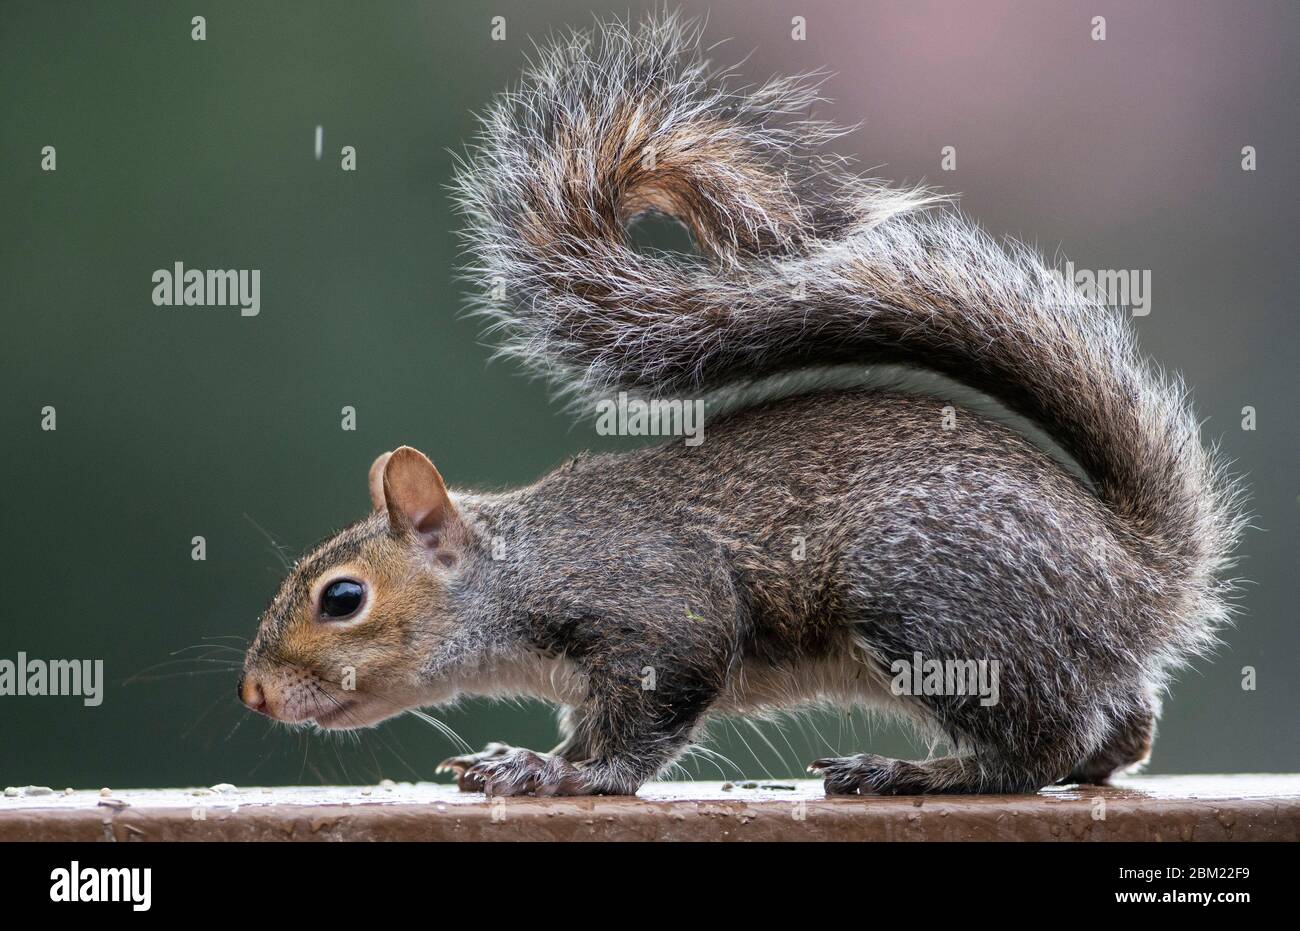 Curly tail Stock Photo